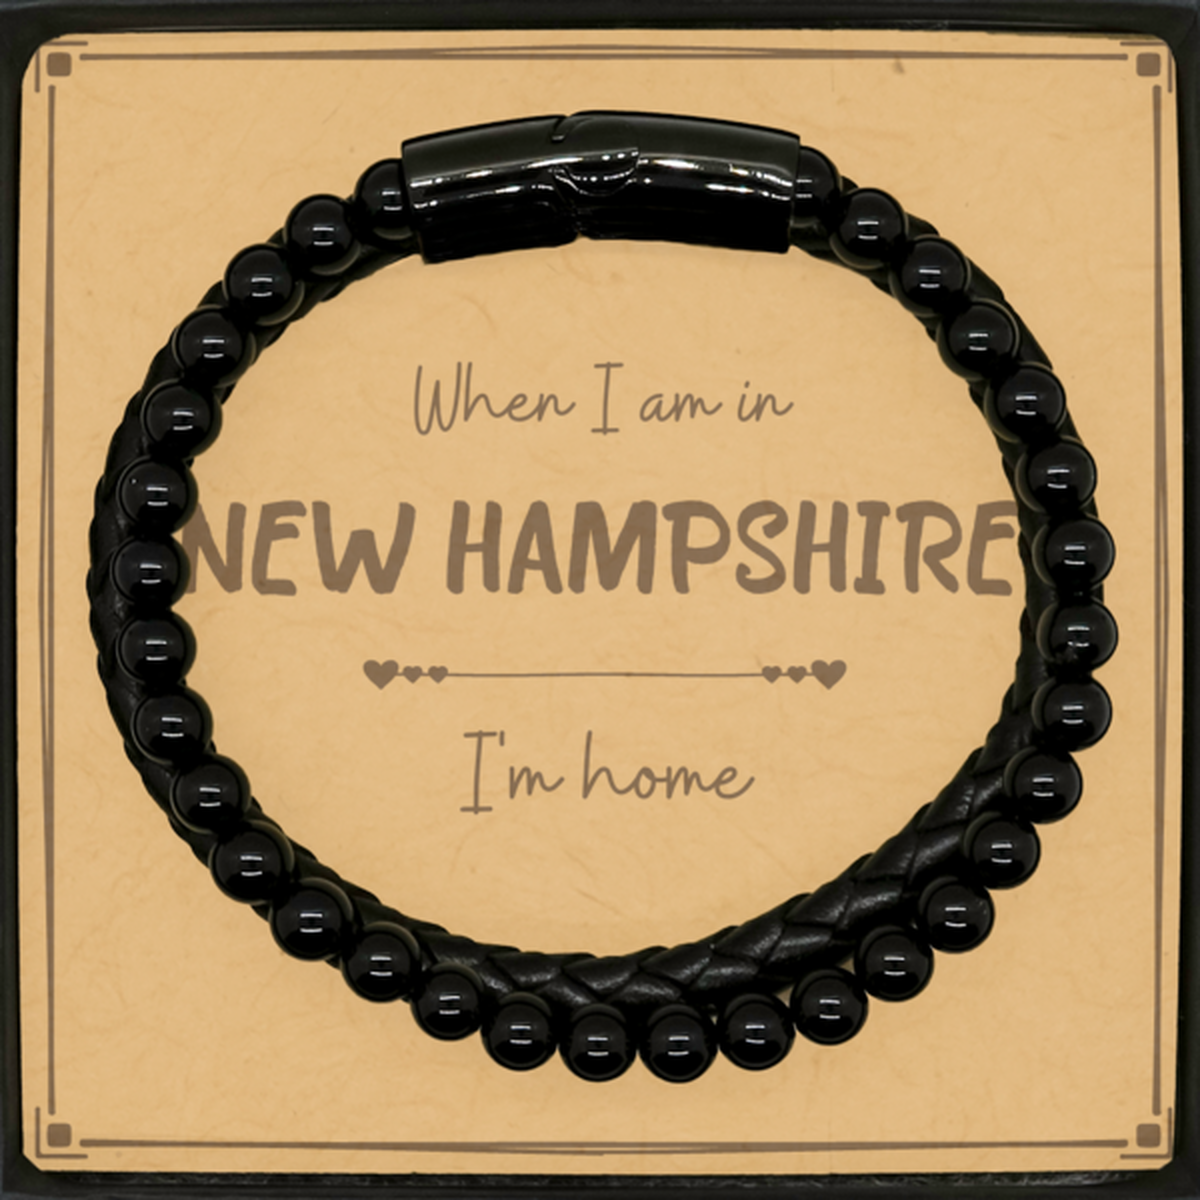 When I am in New Hampshire I'm home Stone Leather Bracelets, Message Card Gifts For New Hampshire, State New Hampshire Birthday Gifts for Friends Coworker